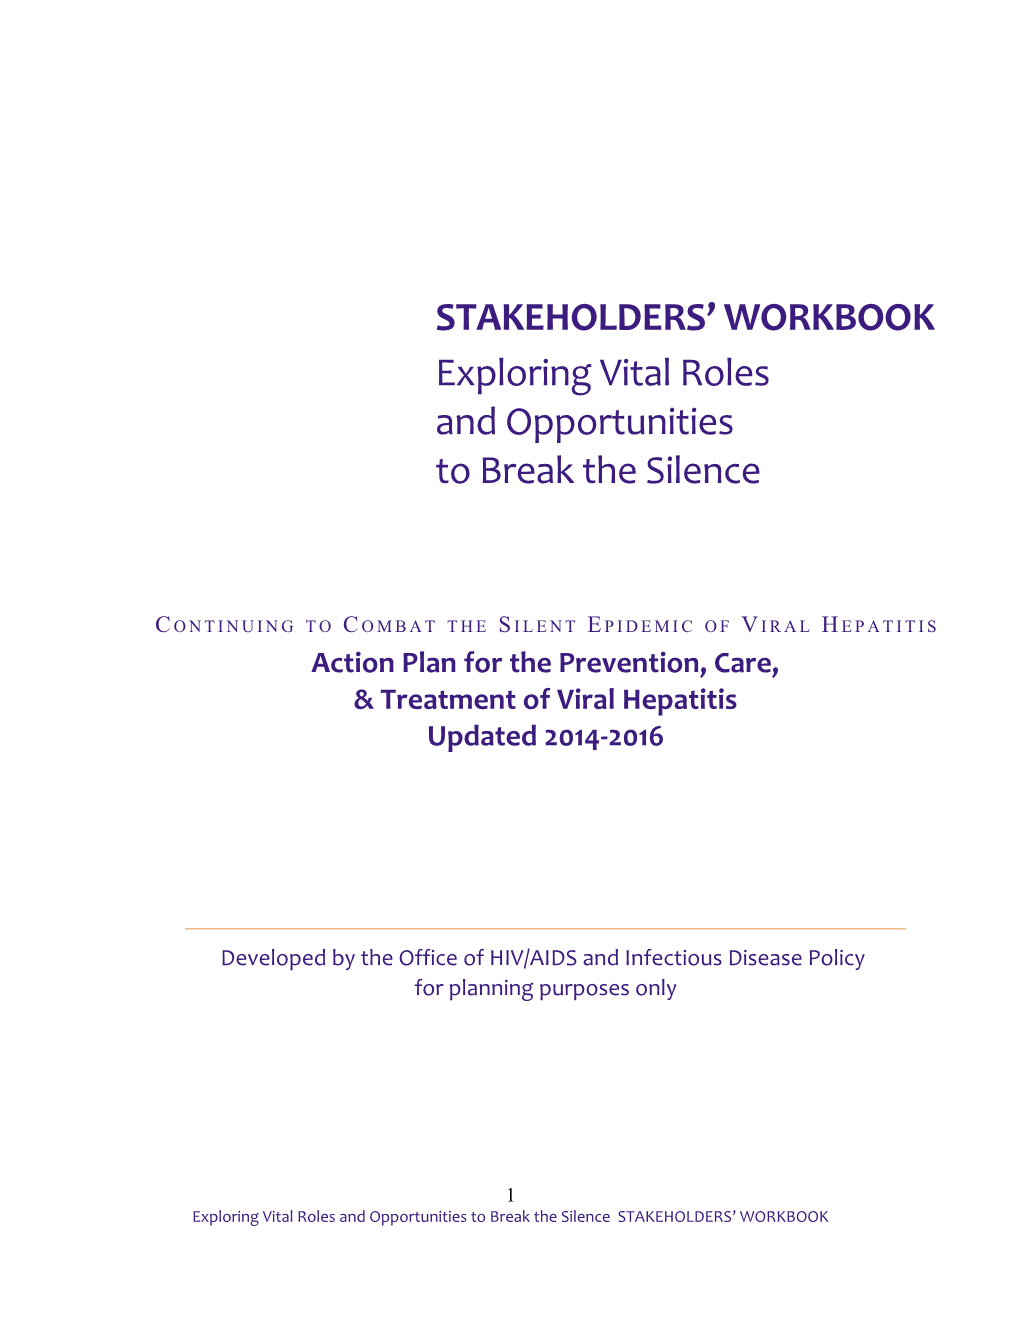 VHAP Non-Federal Stakeholders Workbook